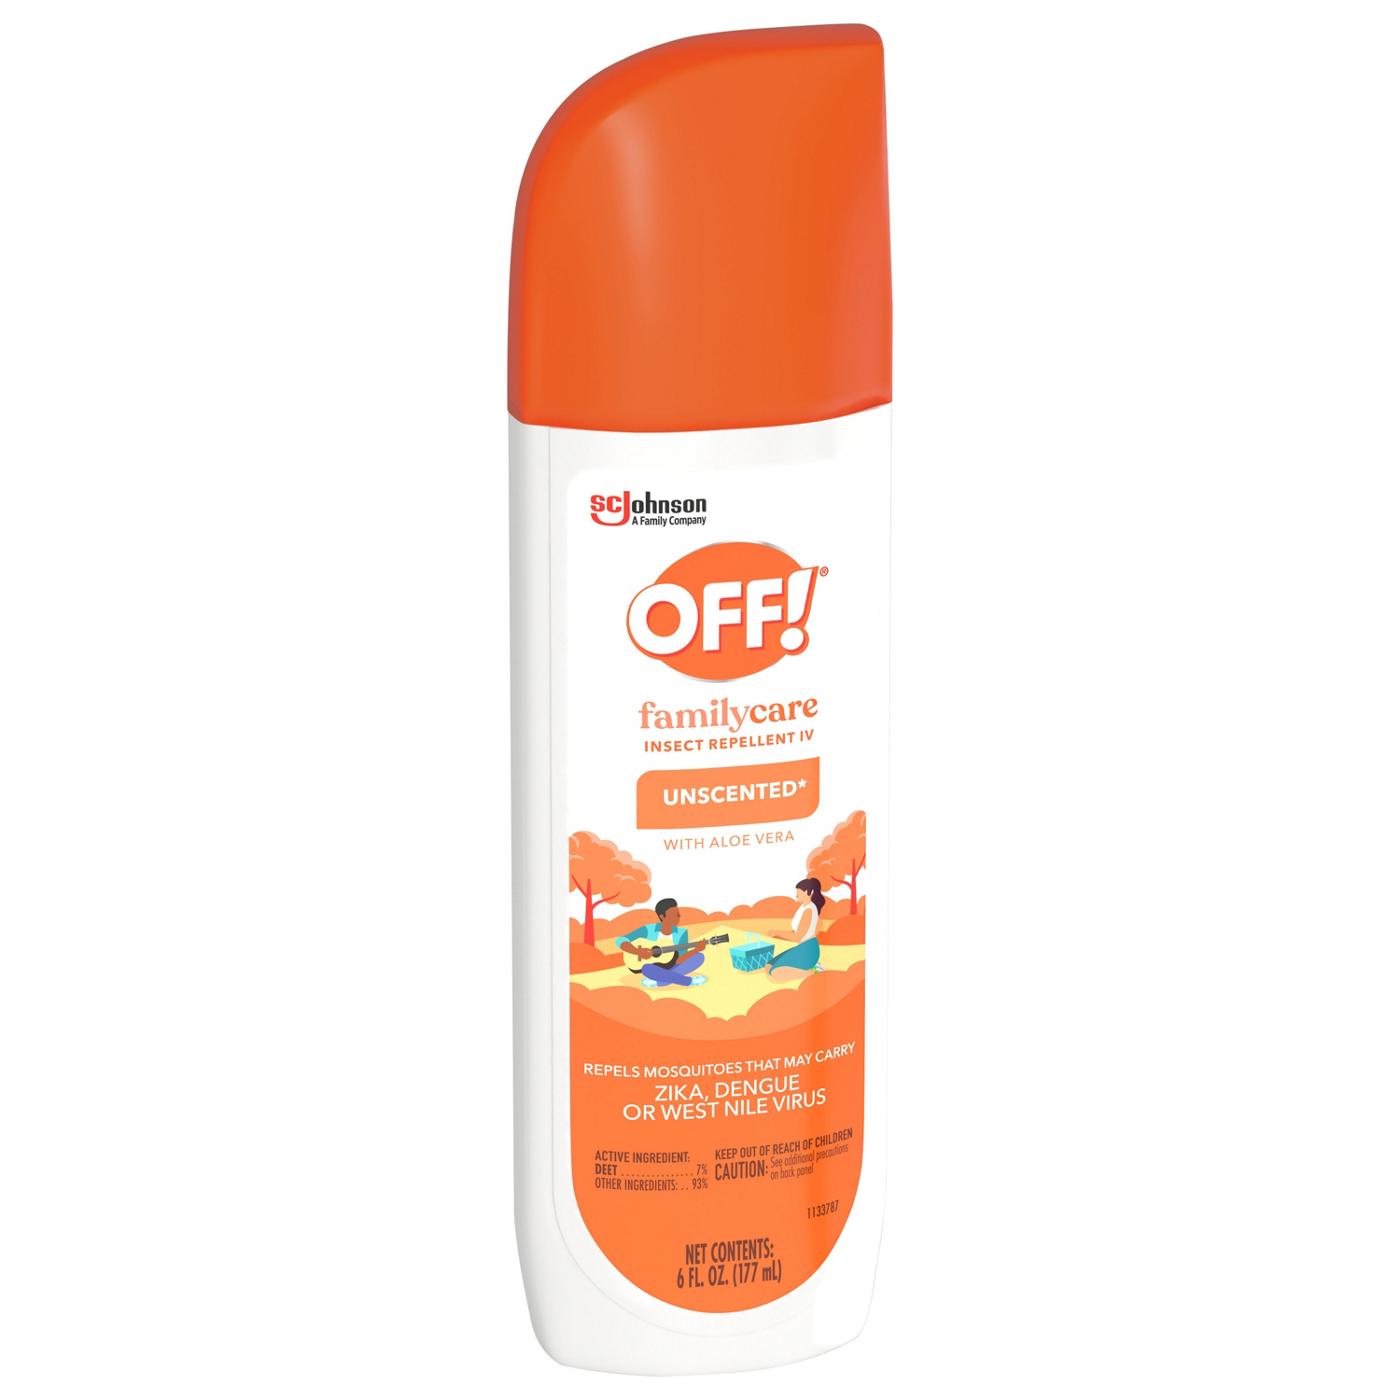 Off! FamilyCare Unscented Insect Repellent IV; image 2 of 3